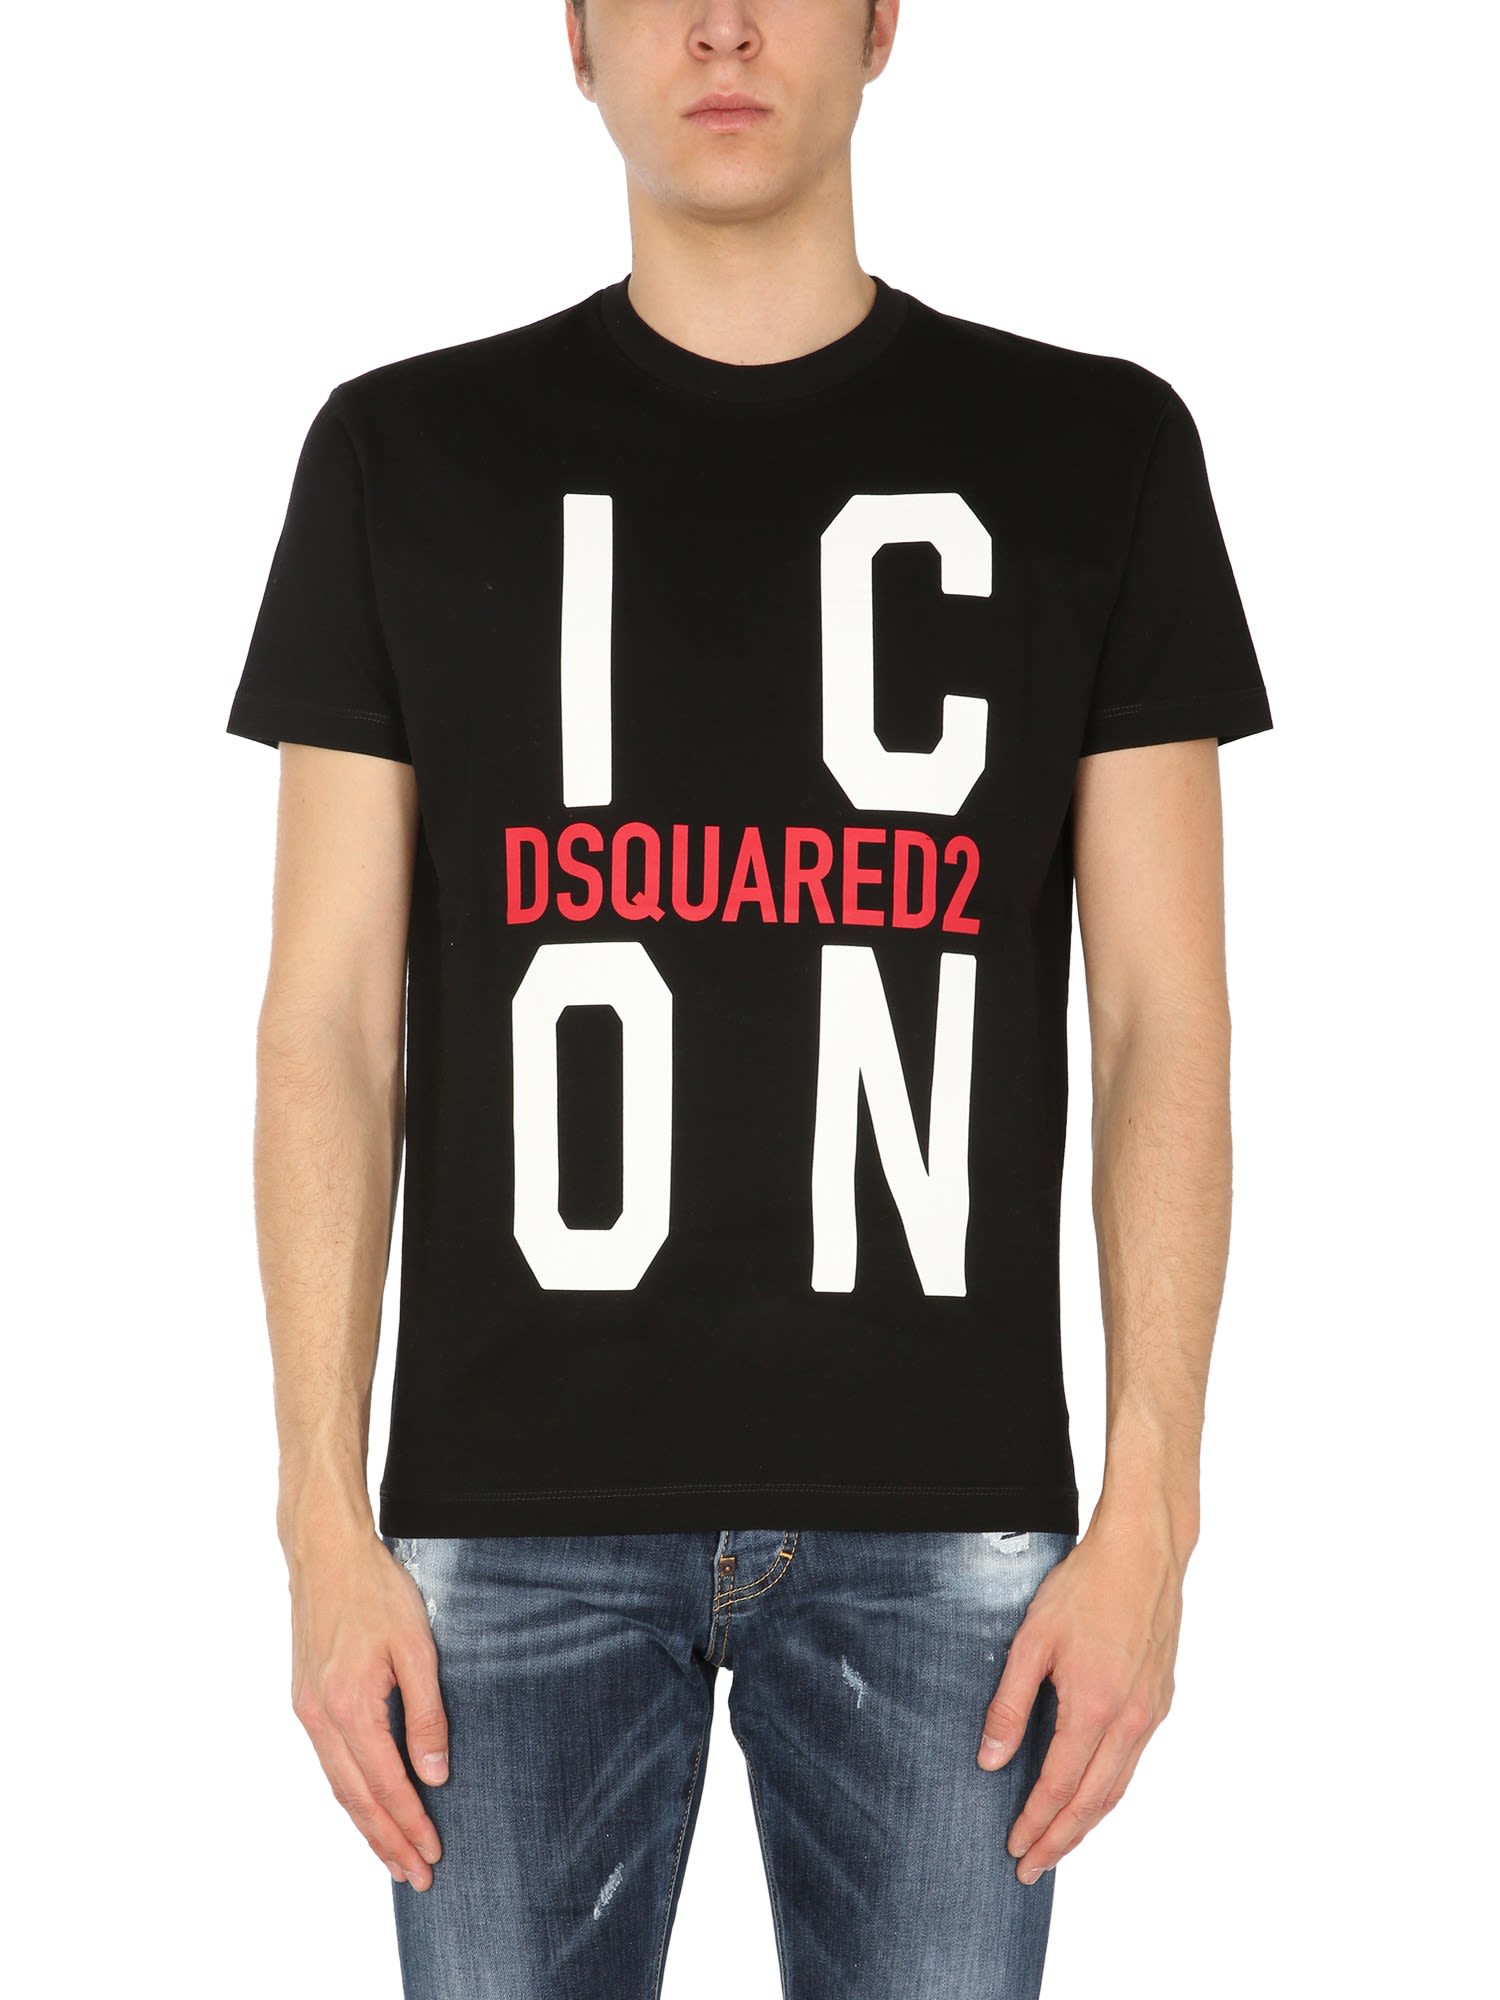 DSQUARED2 T-SHIRT WITH LOGO,S79GC0021 S23009900